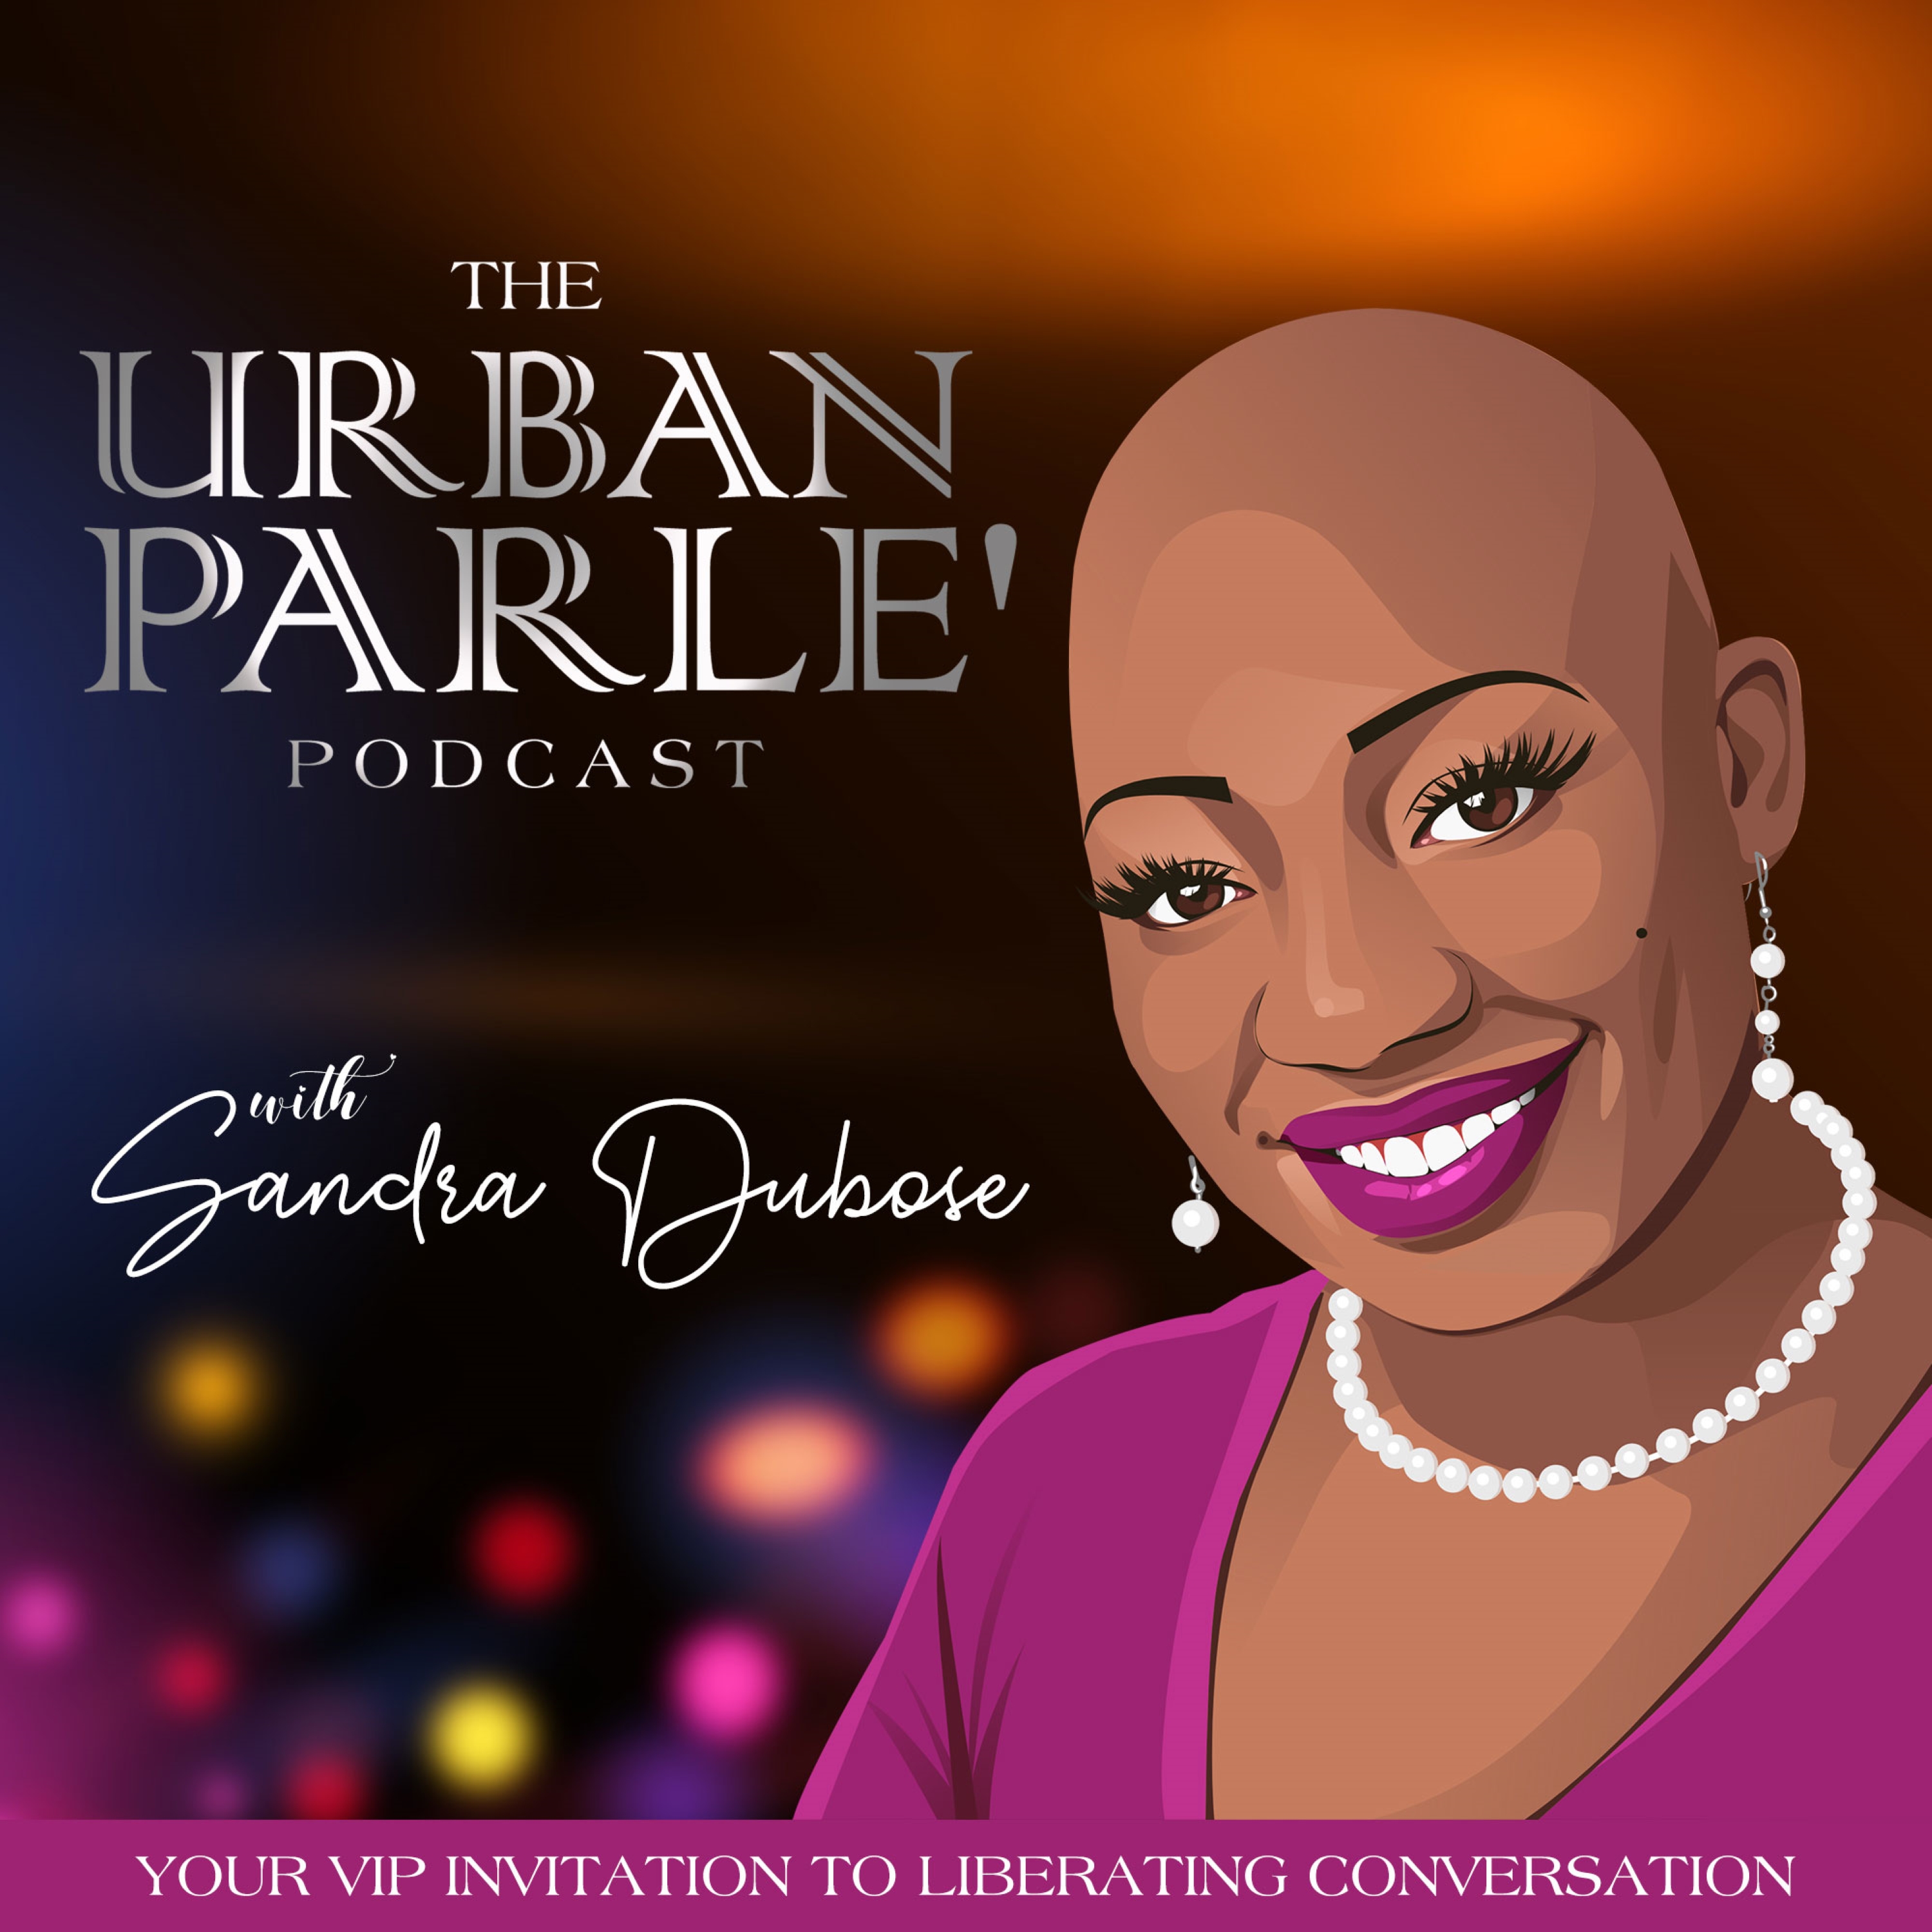 Artwork for The Urban Parle'